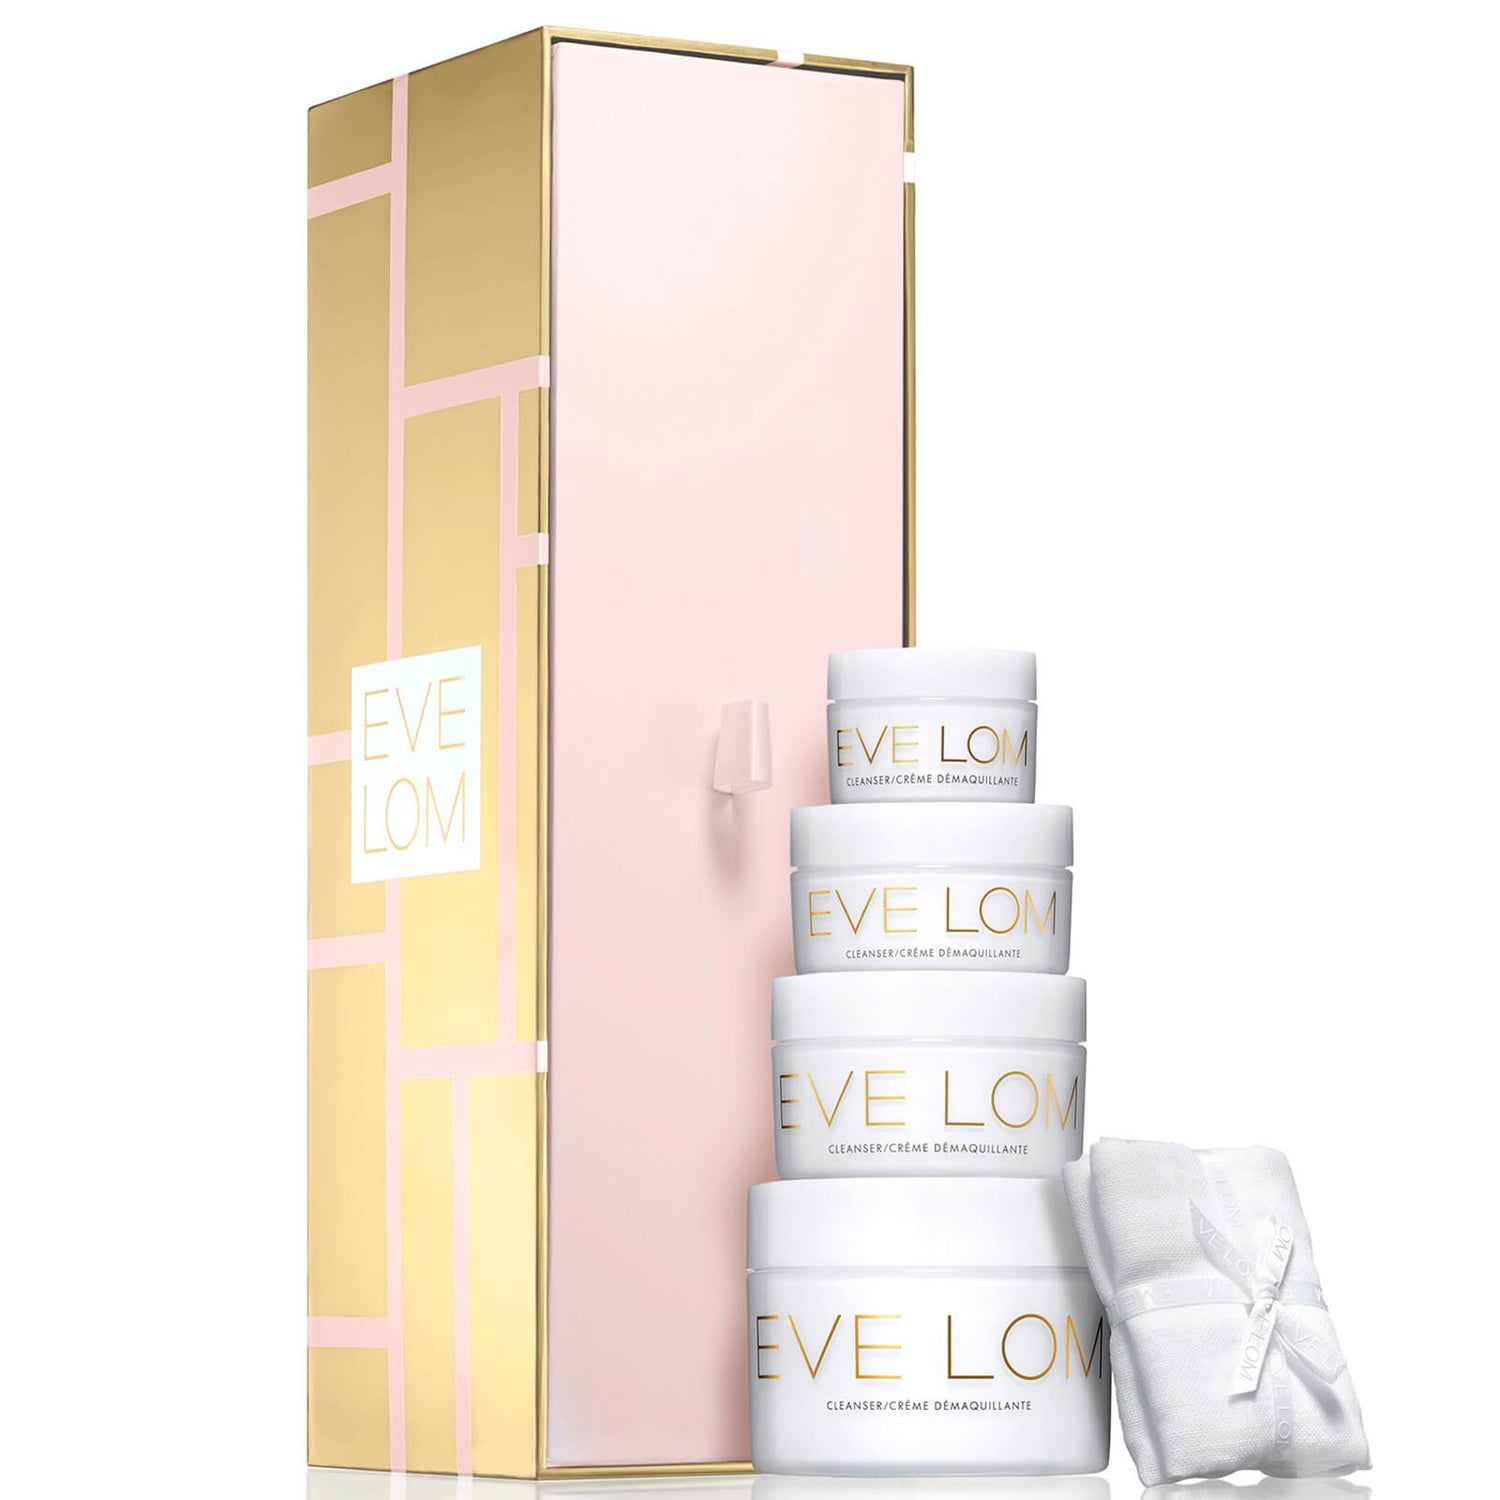 Eve Lom Holiday Decadent detergente in confezione regalo